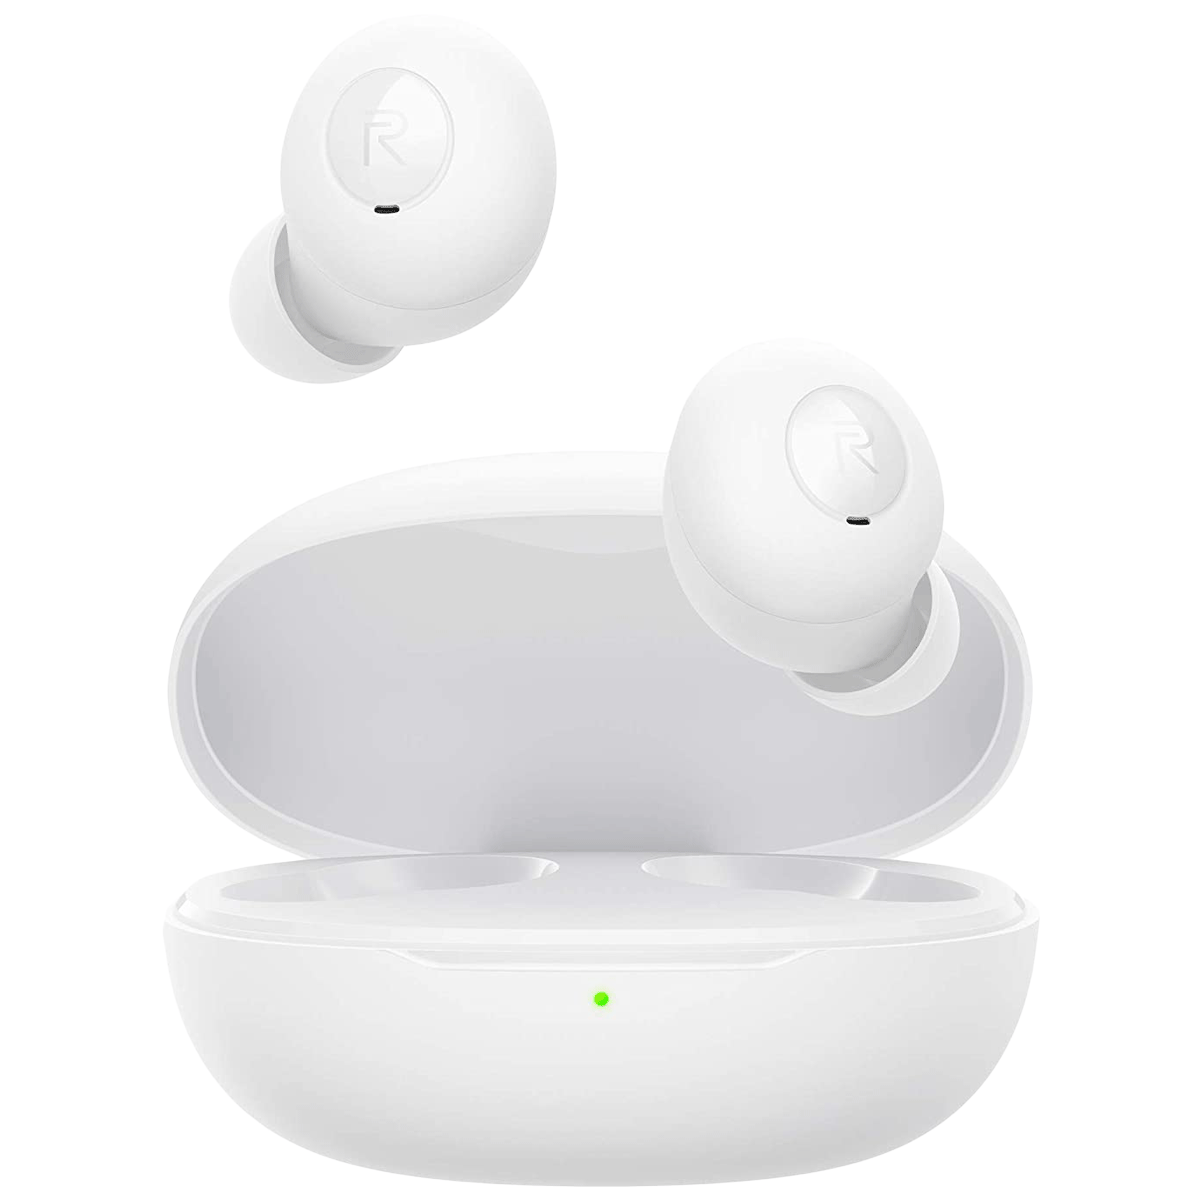 Realme Buds Q In-Ear Truly Wireless Earbuds with Mic (Bluetooth 5.0, Intelligent Touch Controls, RMA215, Quite White)_1